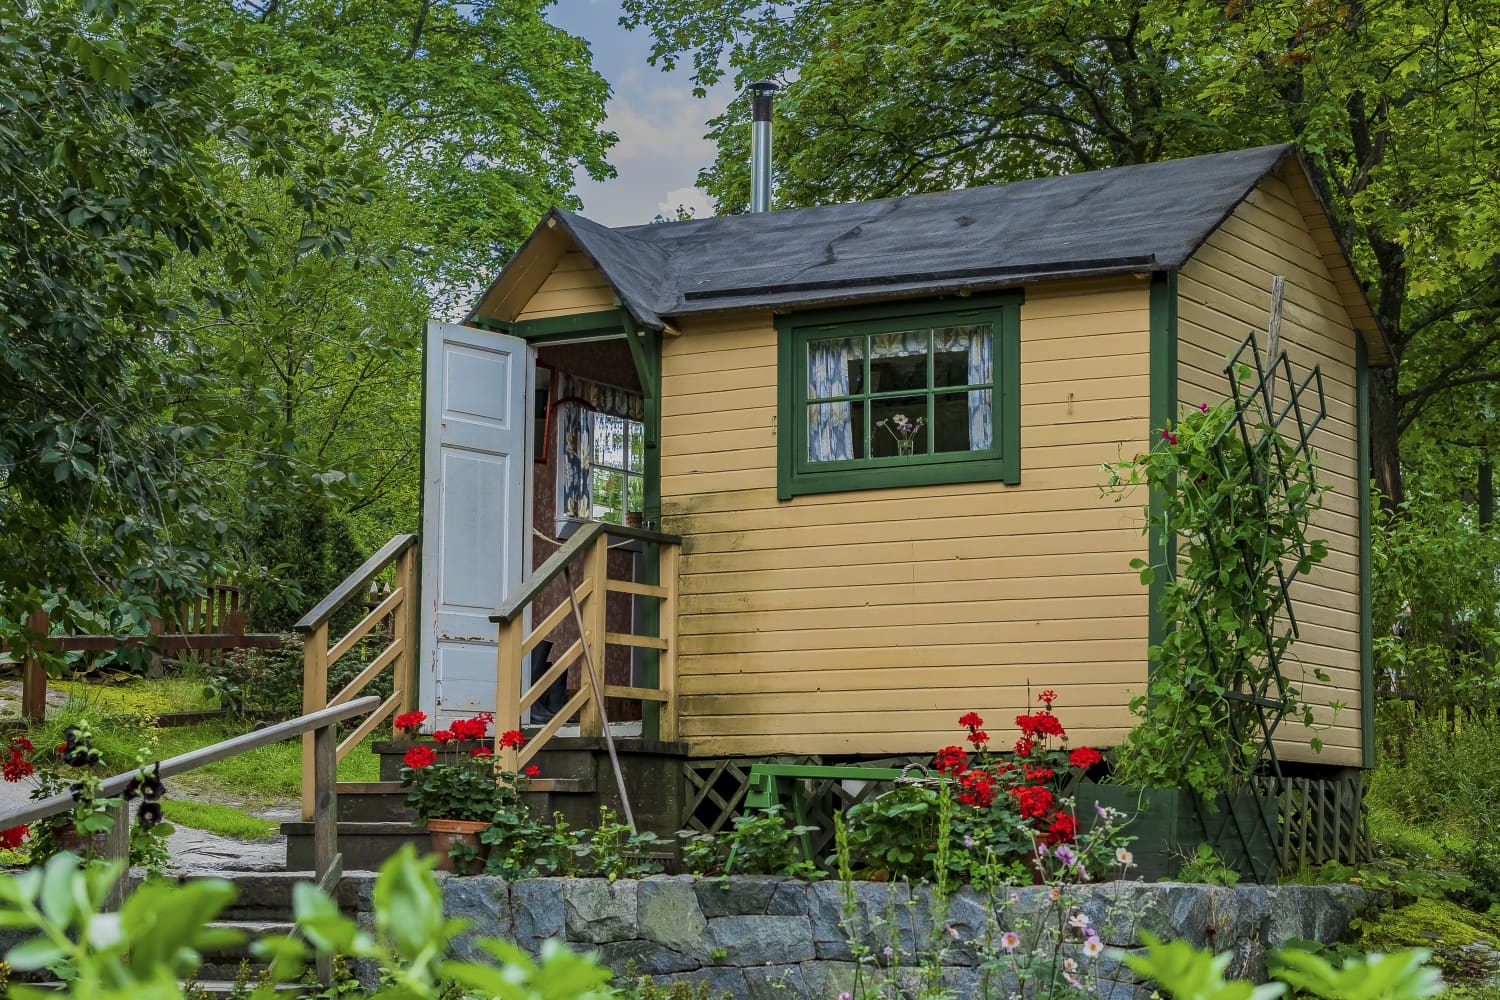 Amazon Is Selling a Foldable Tiny House for $12,000